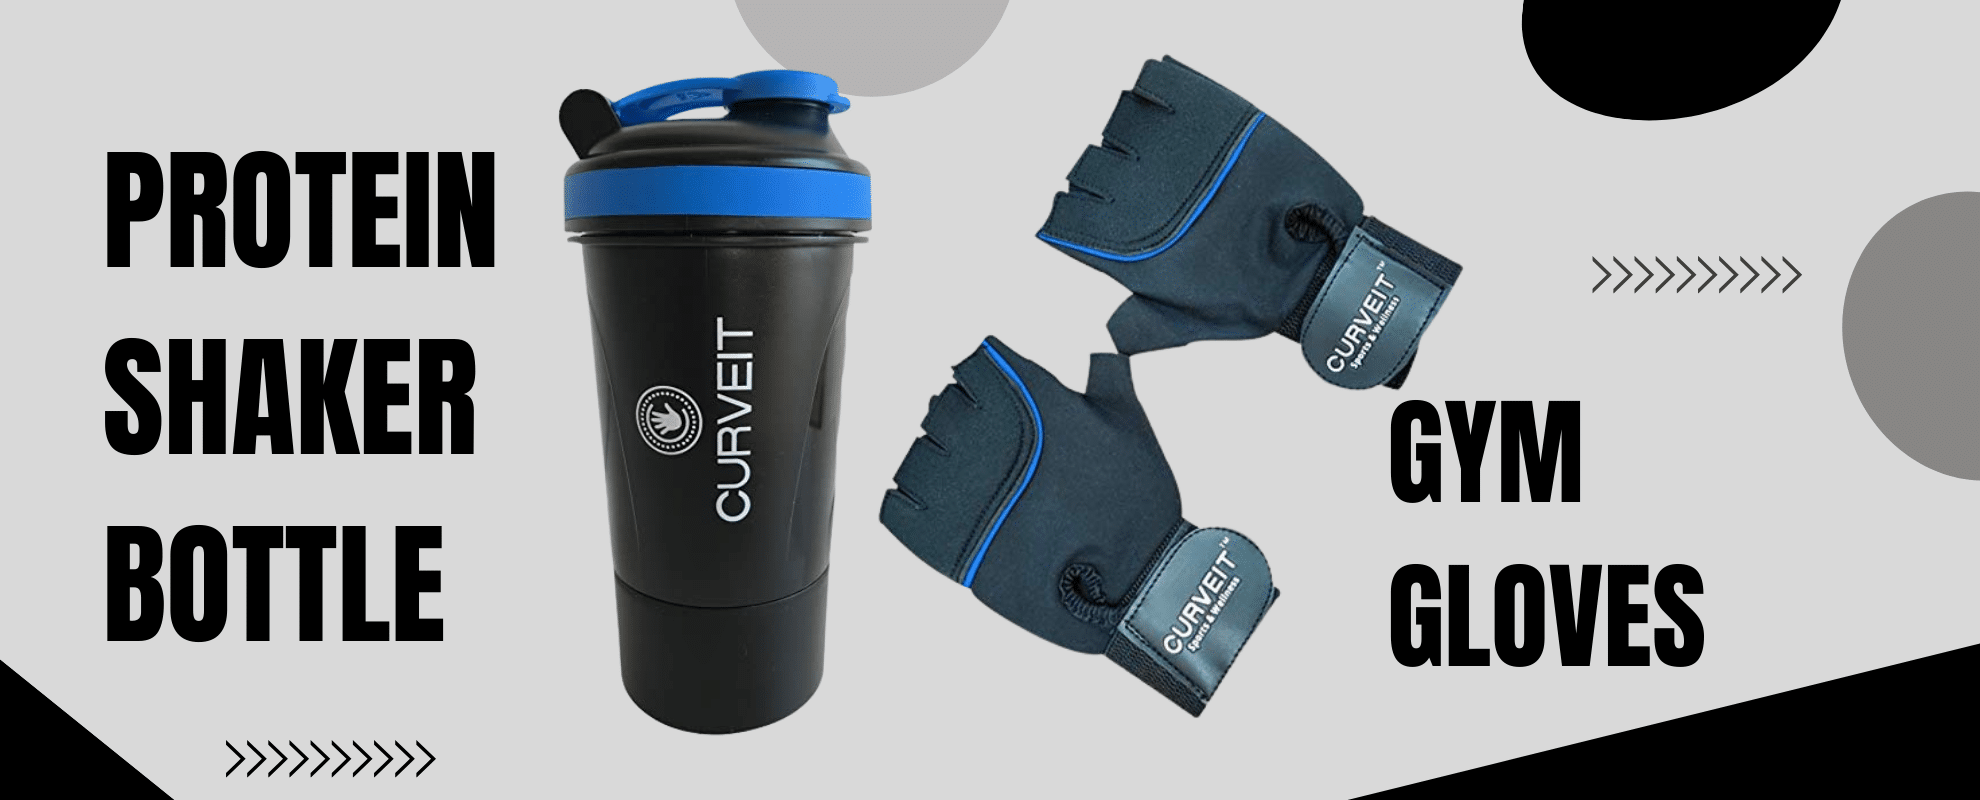 Protein shaker and Gym Gloves Banner